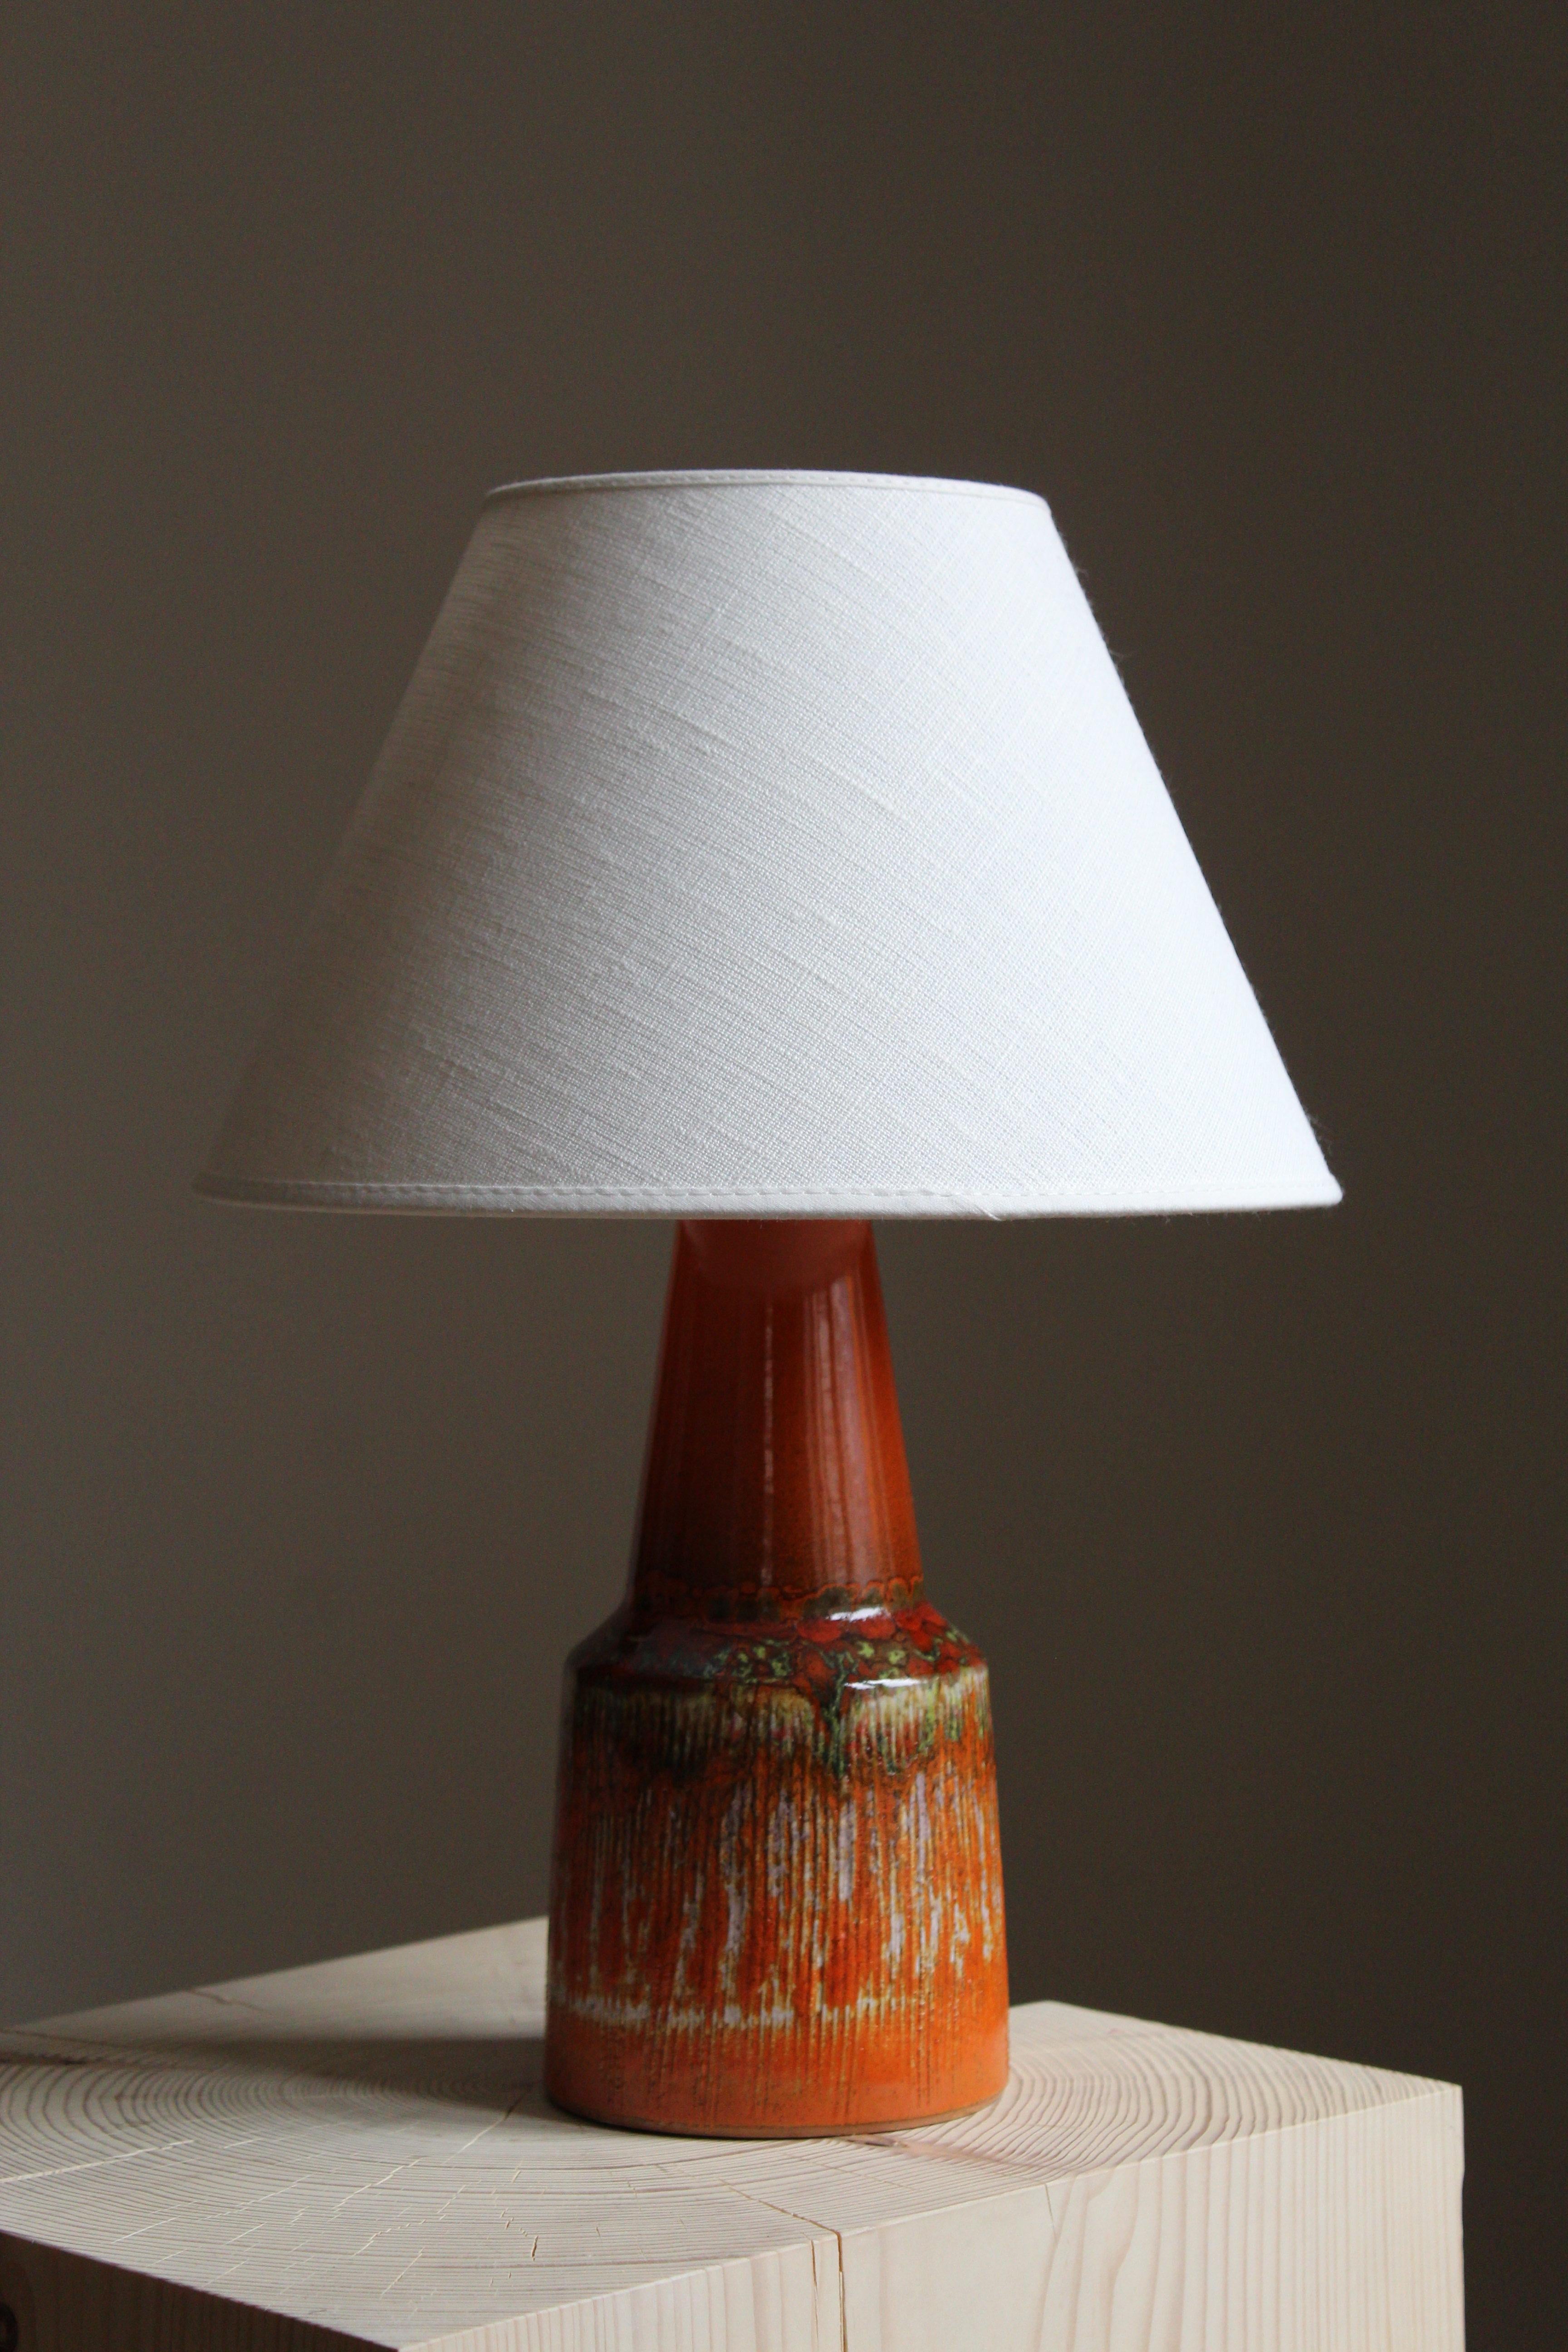 A table lamp, stoneware with a highly artistic glaze. Lampshade not included.

Glaze features orange-brown color and hints of green.